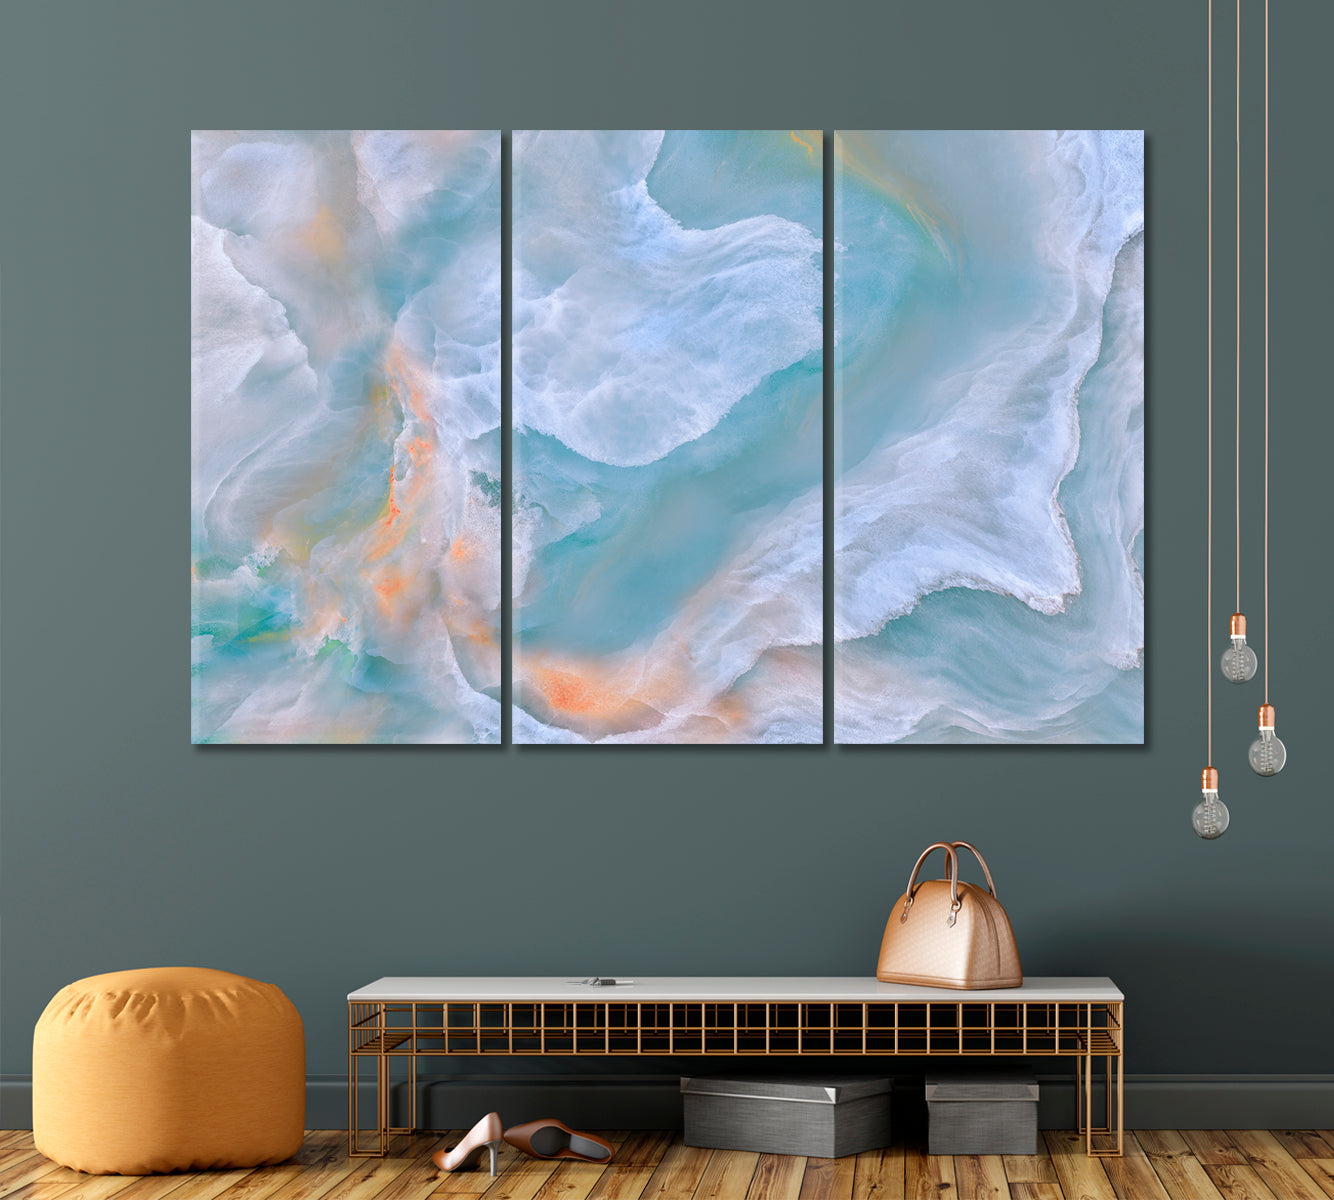 Cloudy Abstract Onyx Marble Veins Free-flowing Natural Luxury Artwork Fluid Art, Oriental Marbling Canvas Print Artesty 3 panels 36" x 24" 